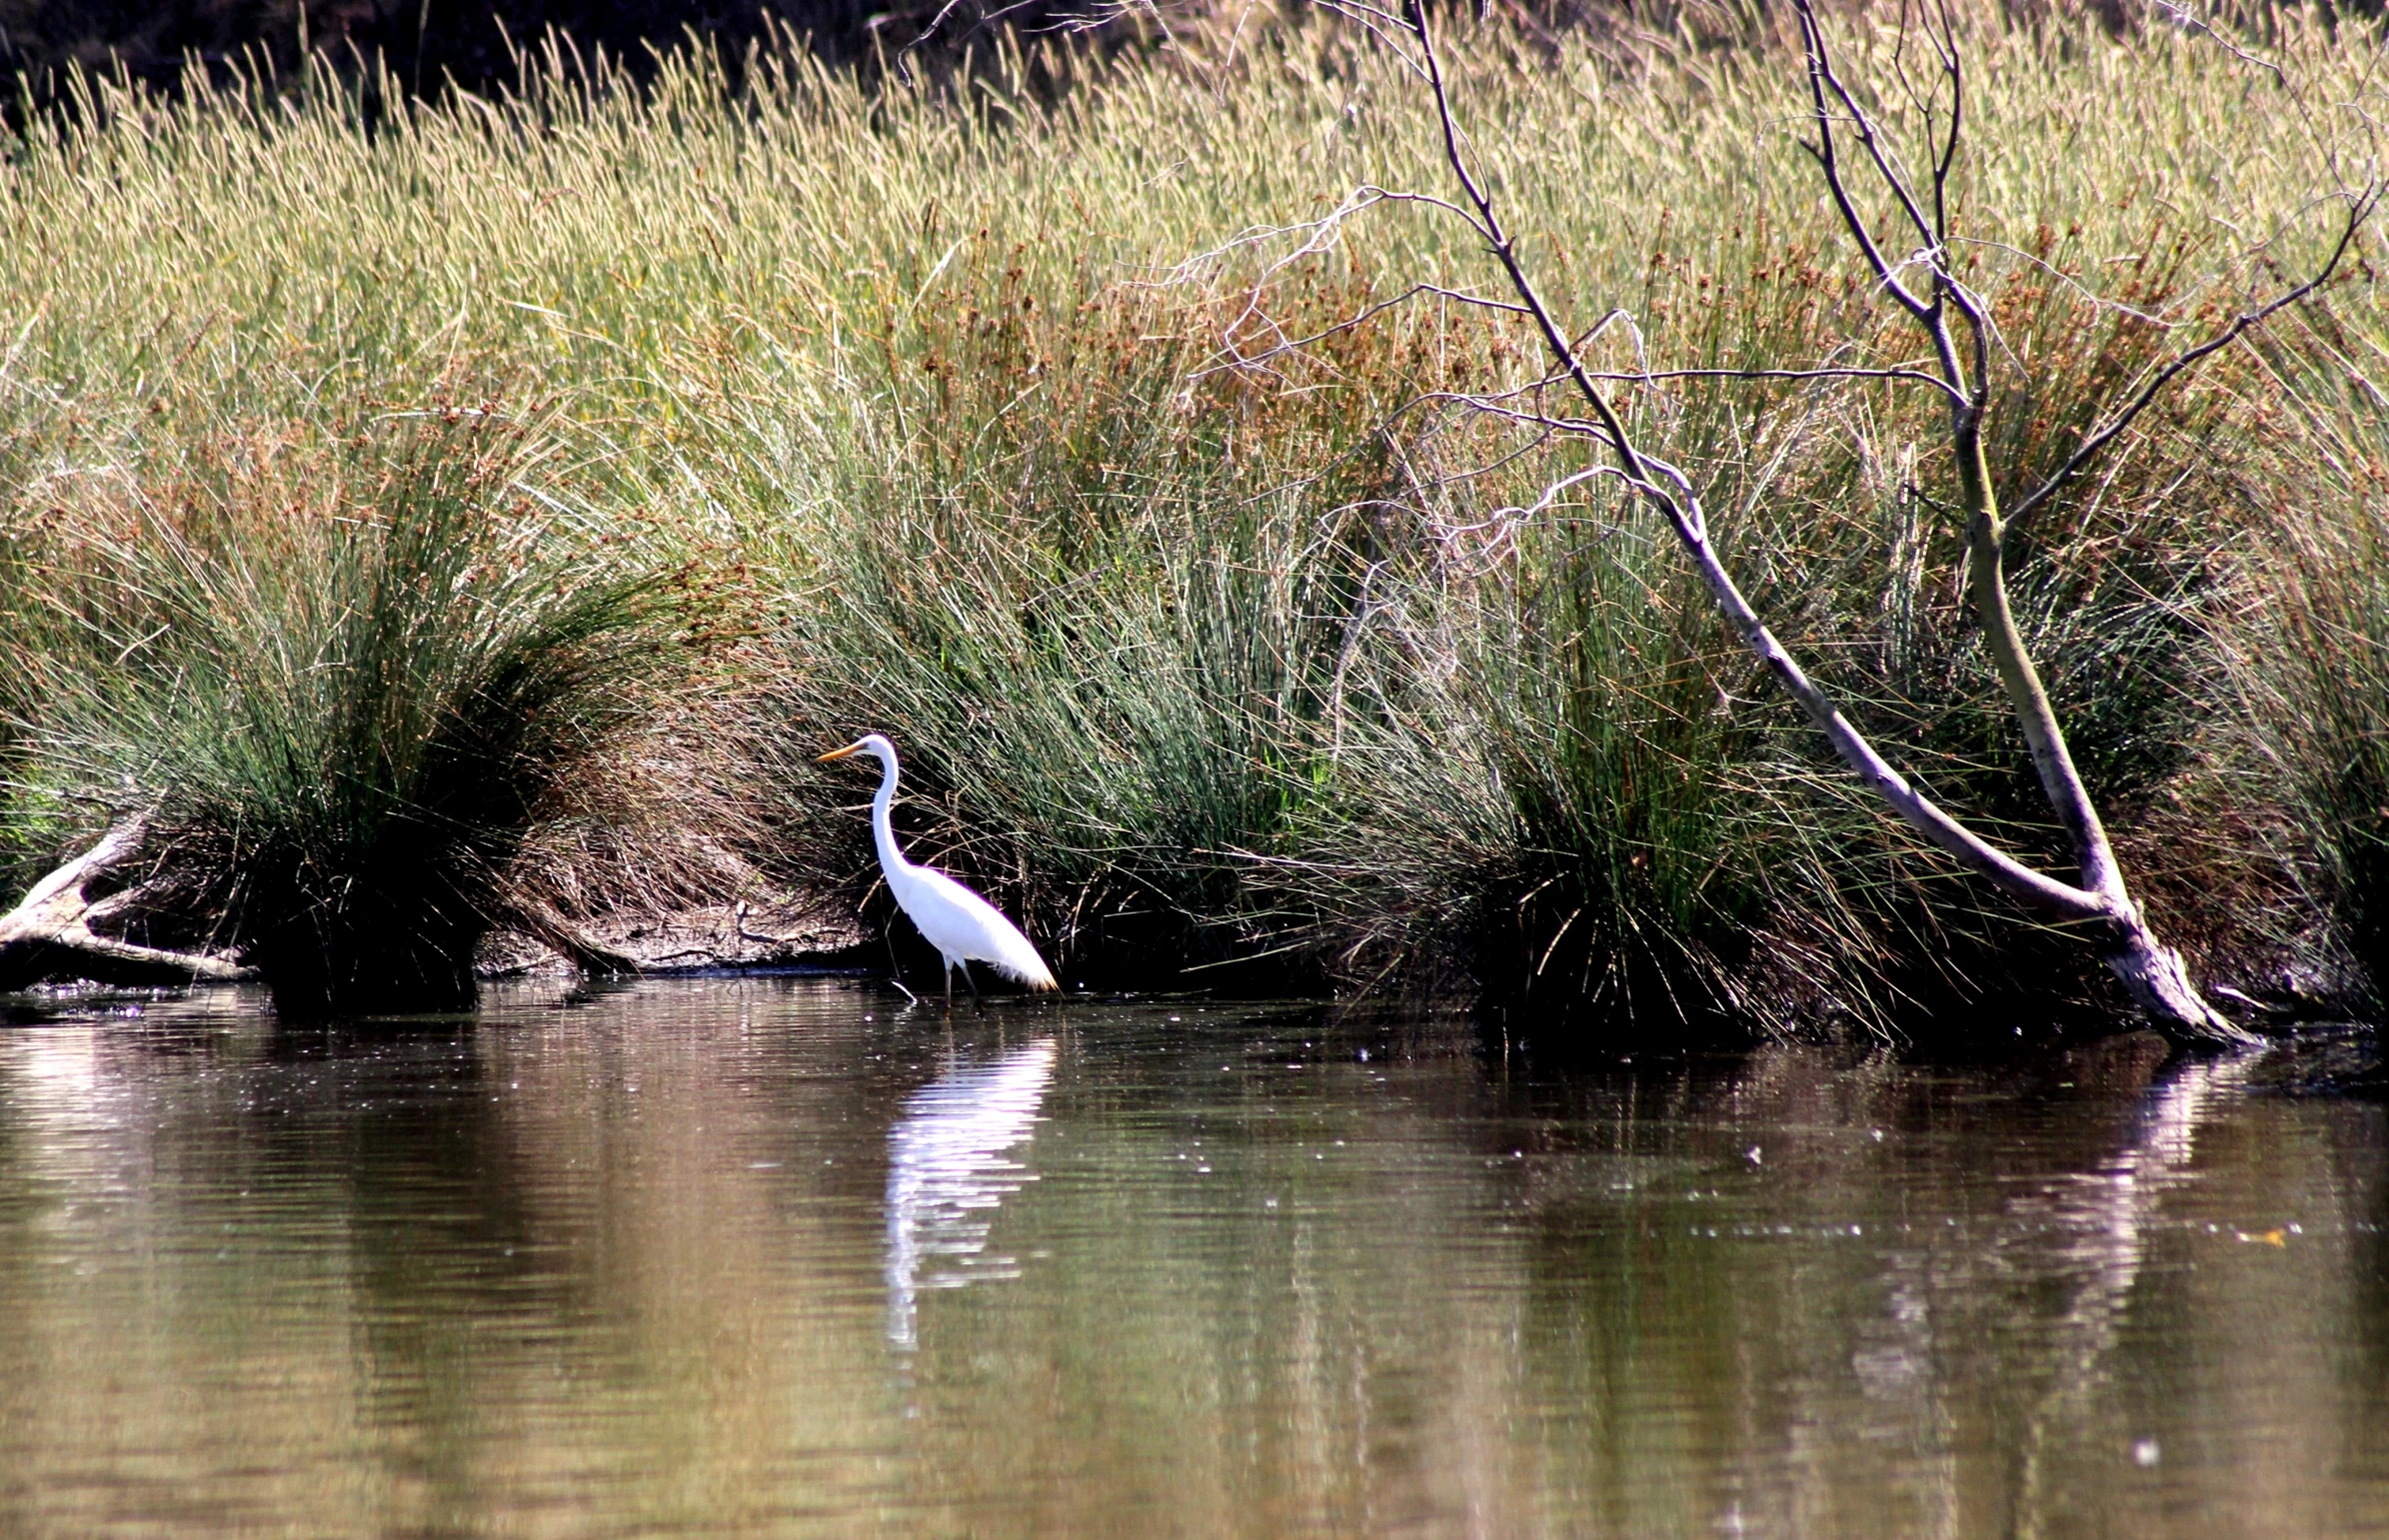 a bird stands in the water beside some vegetation